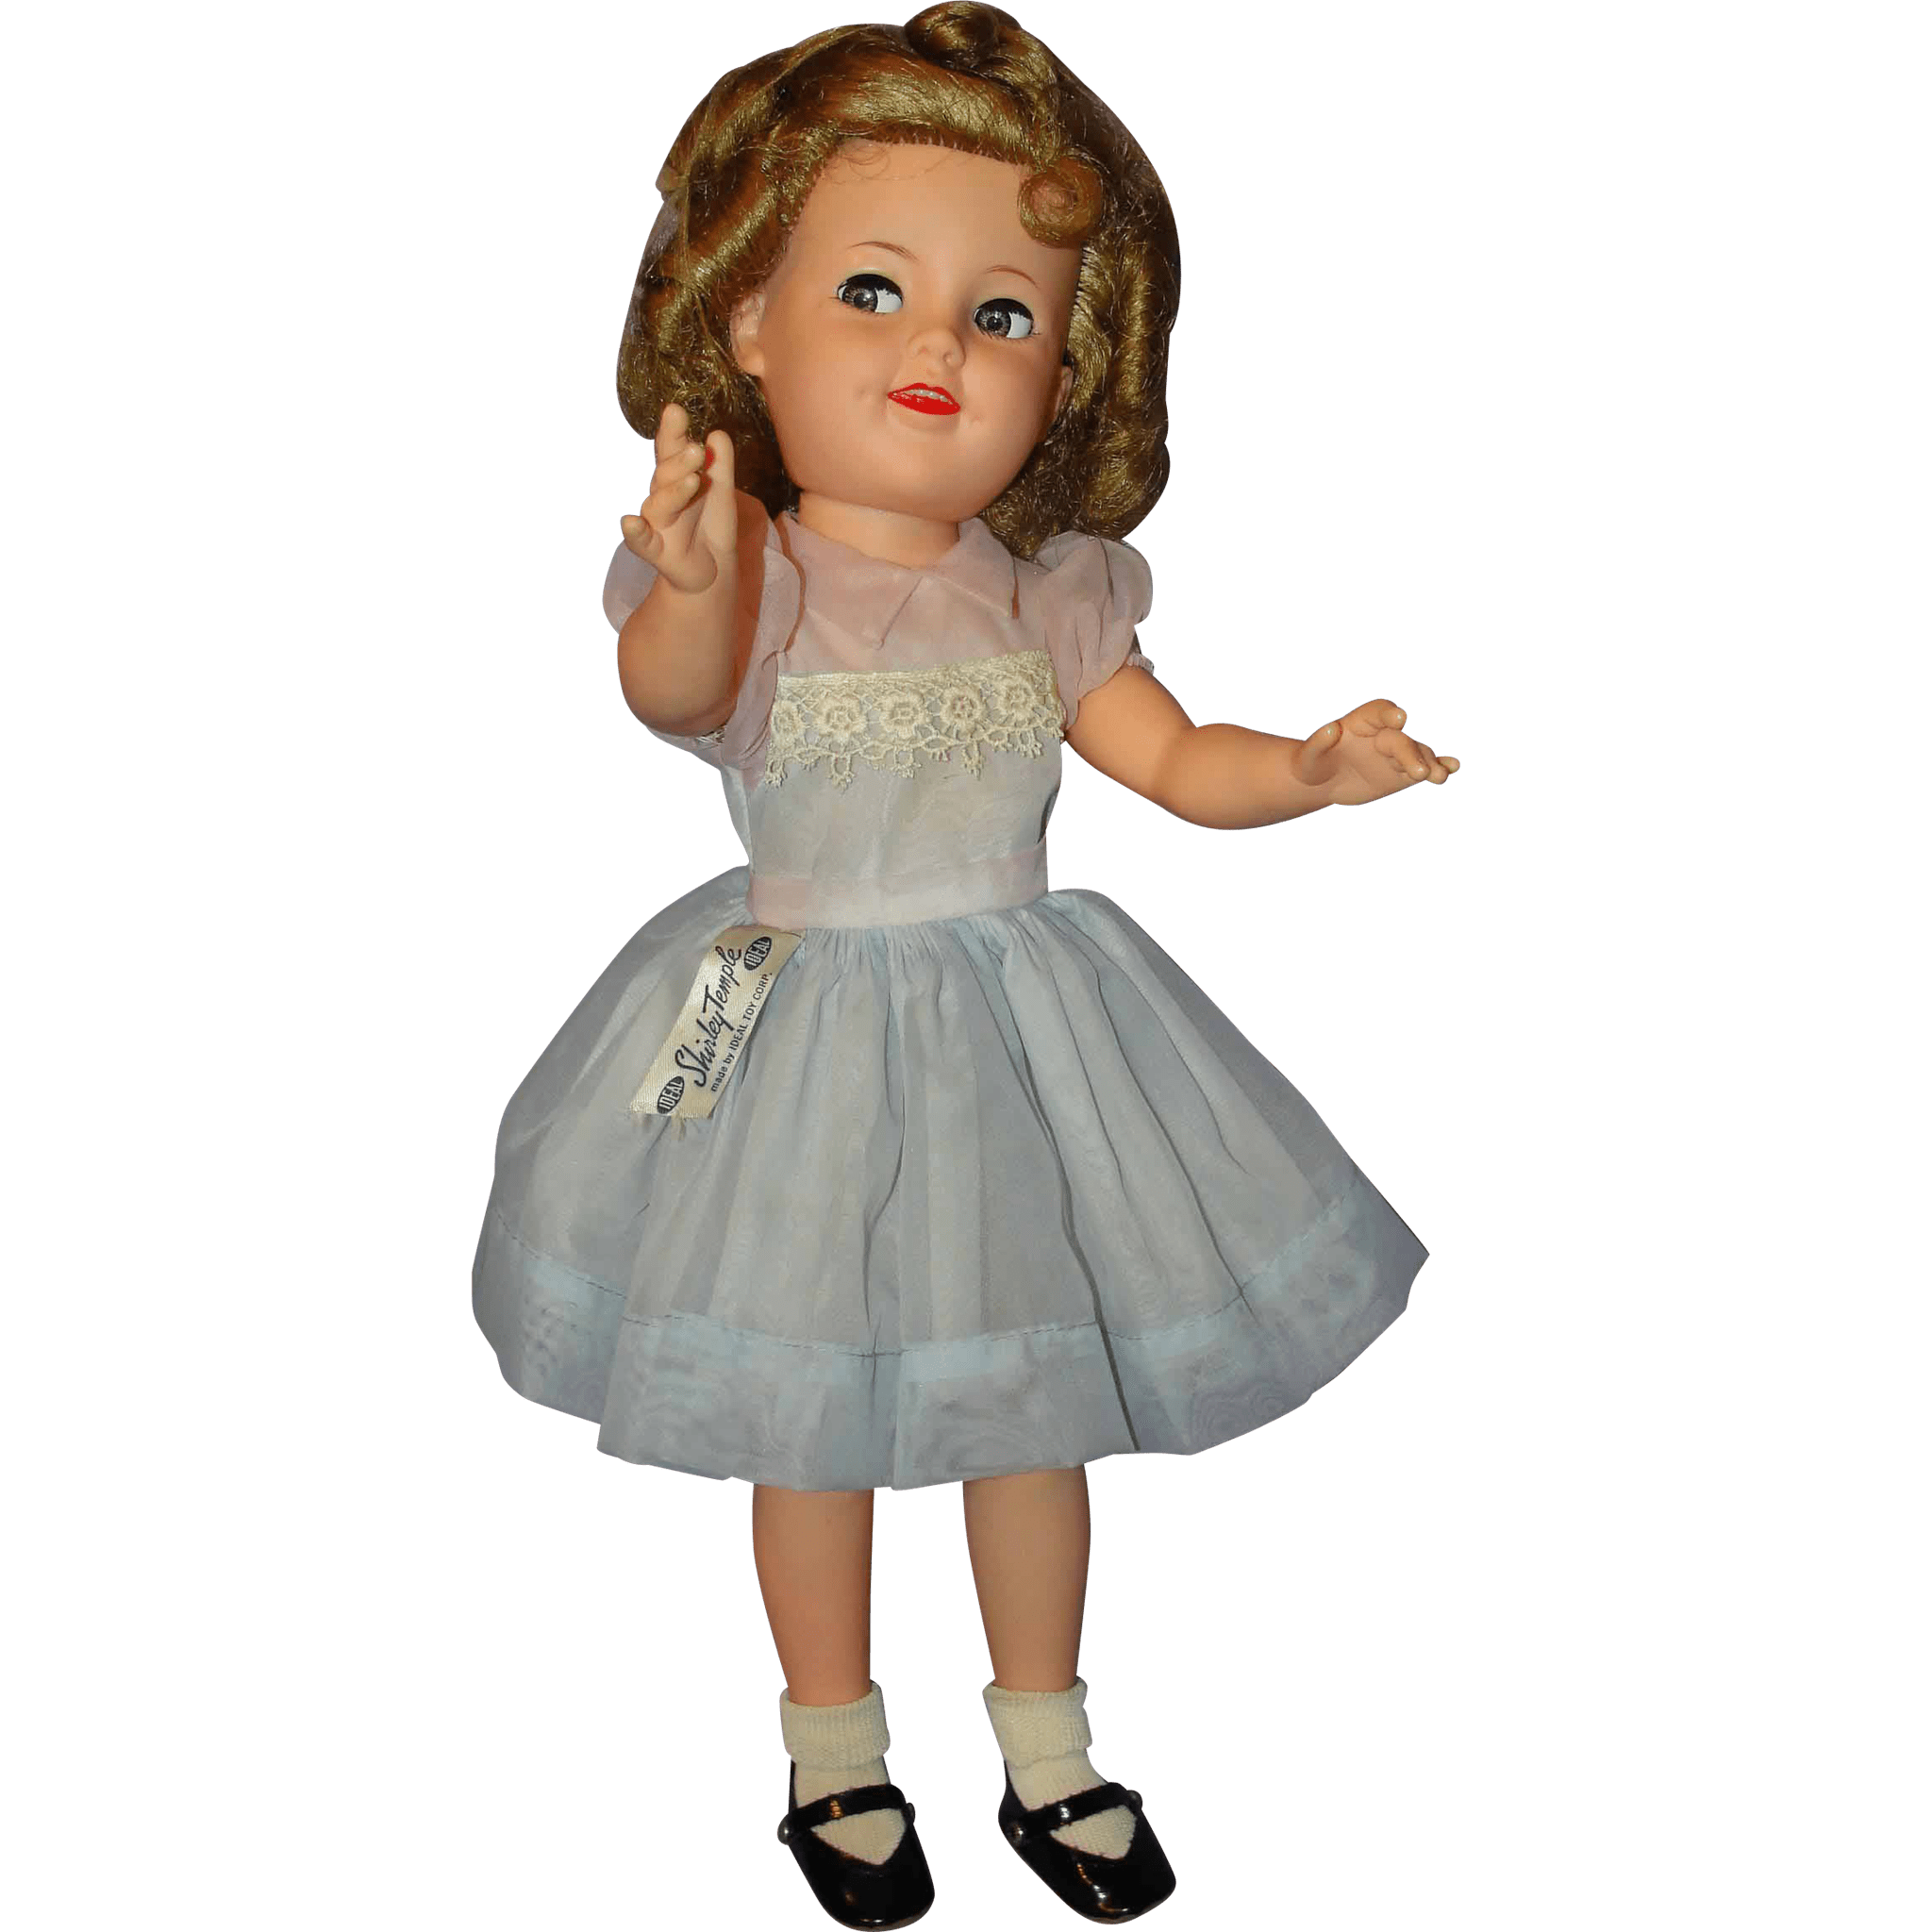 Baby Doll Transparent Background